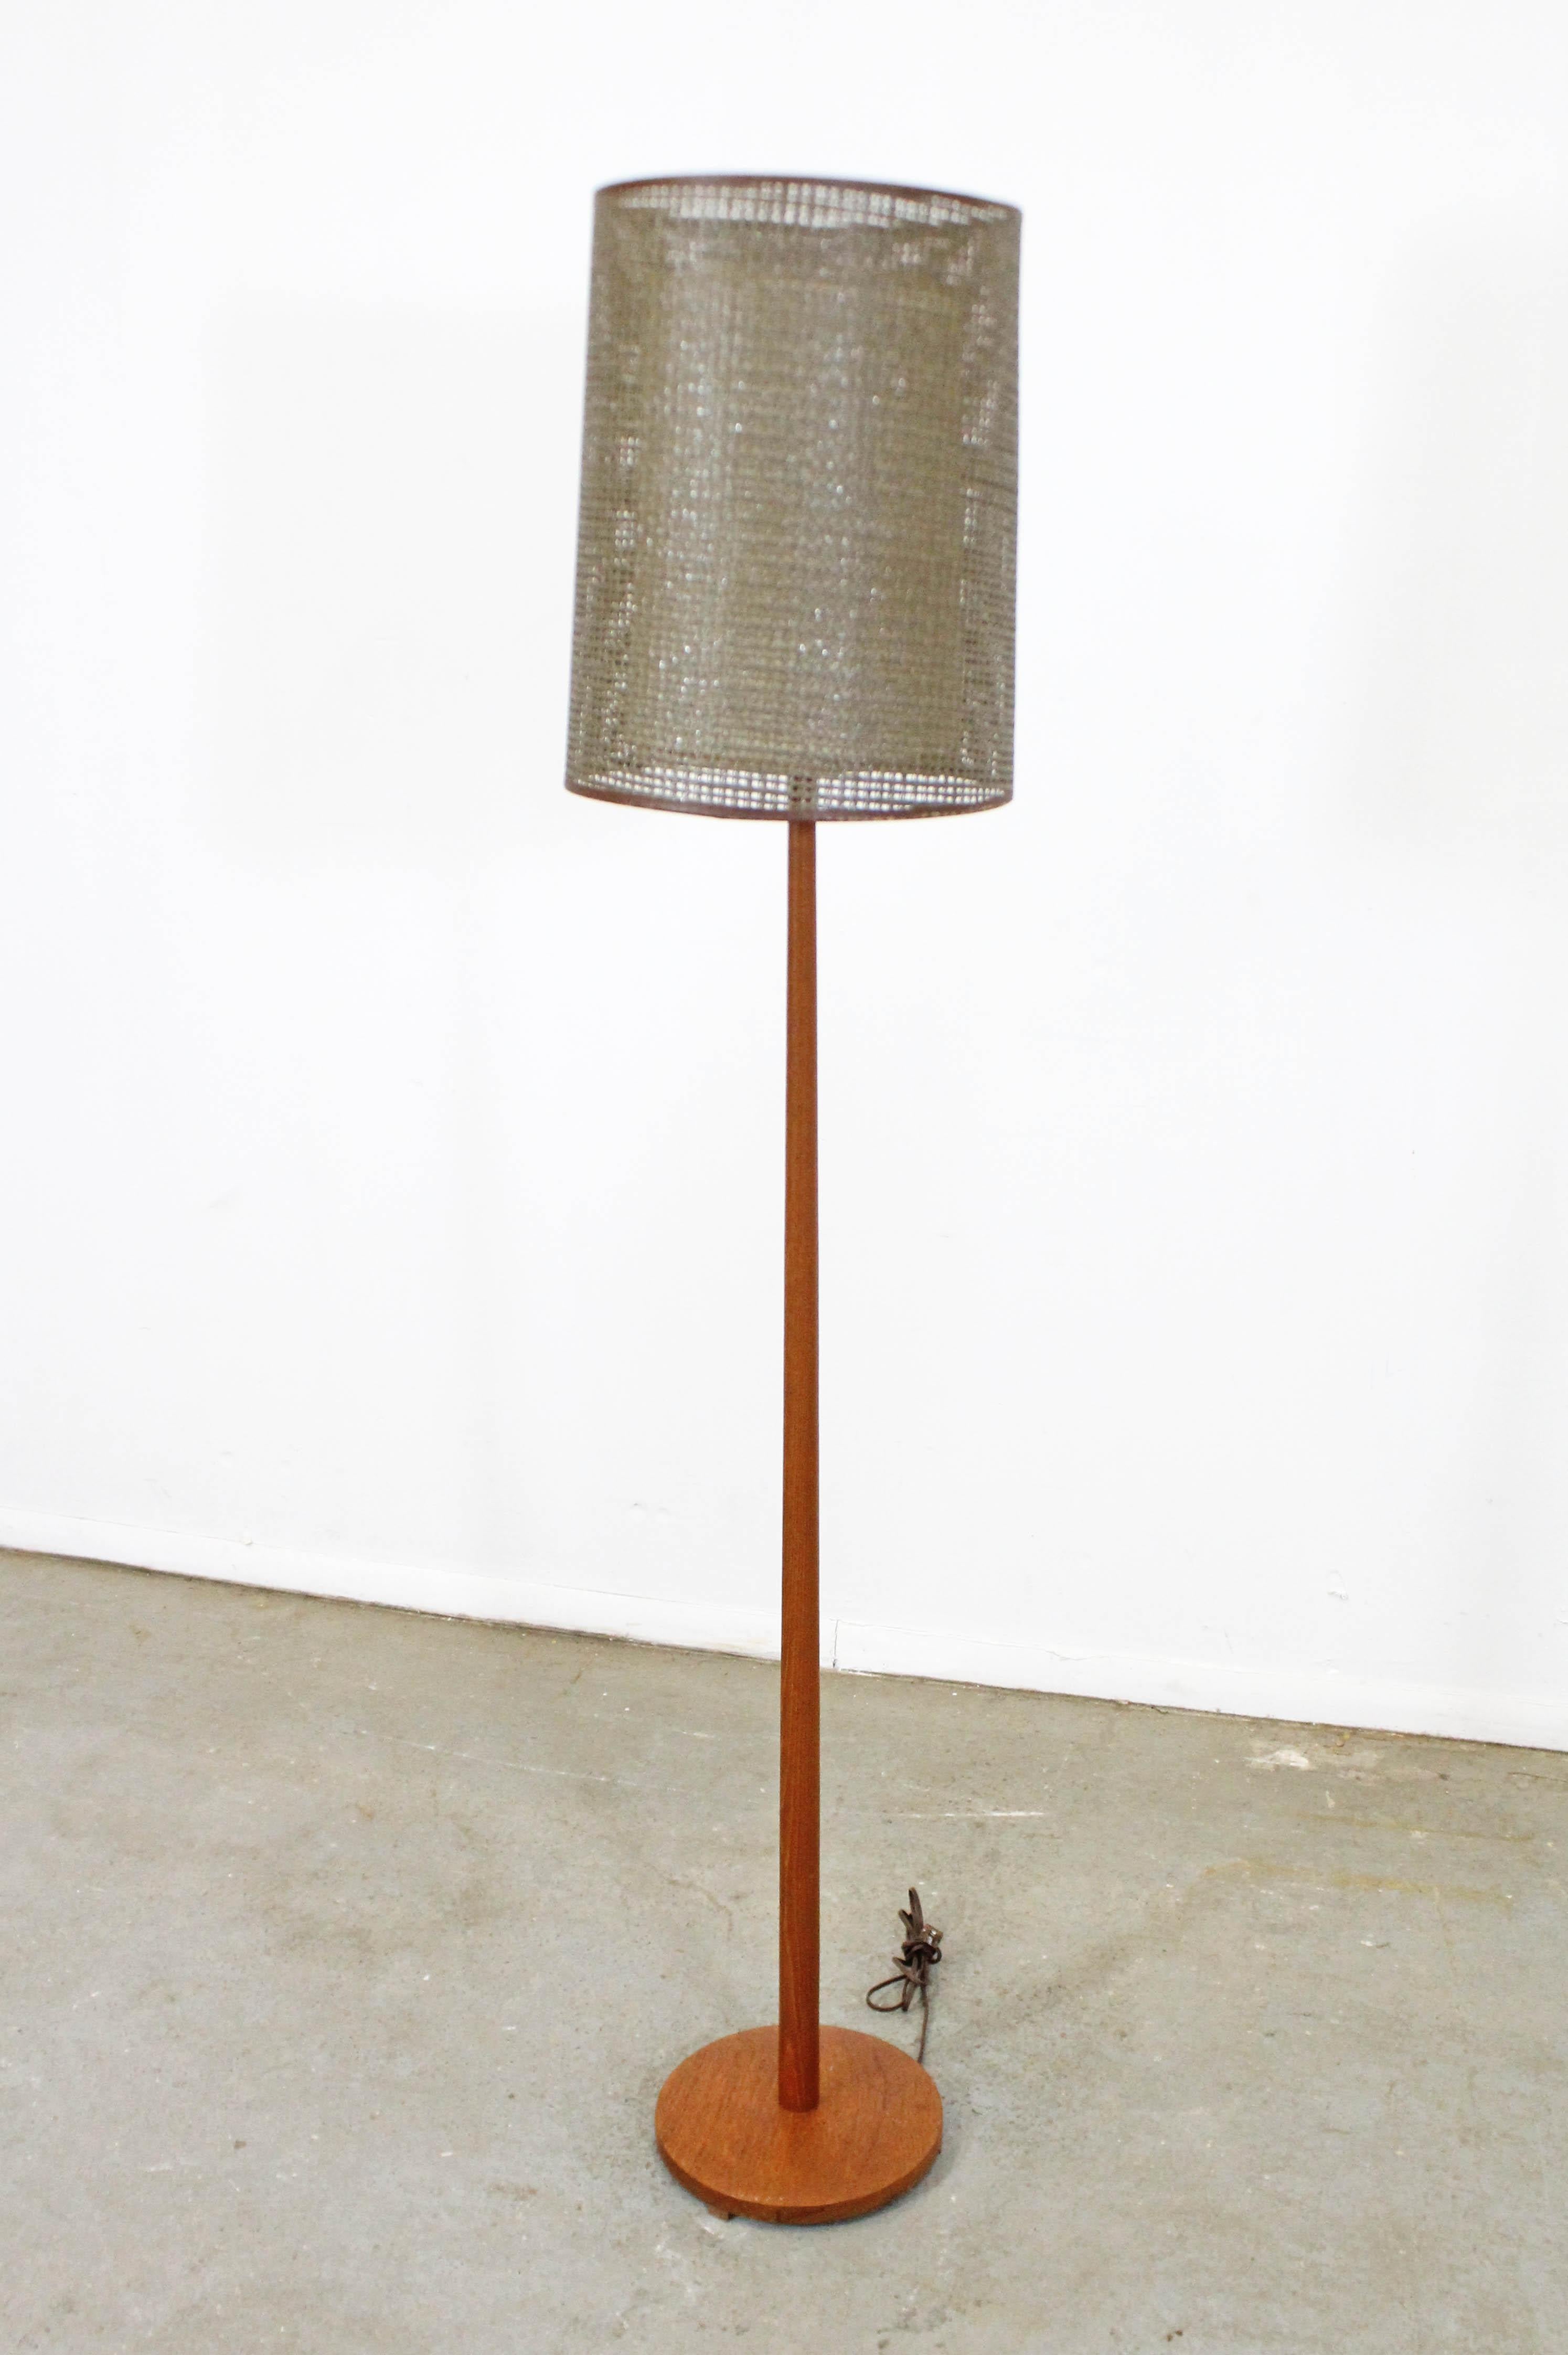 Offered is a vintage Danish modern teak floor lamp with a double-shade made by George Kovacs for Underwriters Laboratories, Inc., circa 1960. In good, working condition (has been tested). Shows minor surface scratches/wear on wood and some edge wear